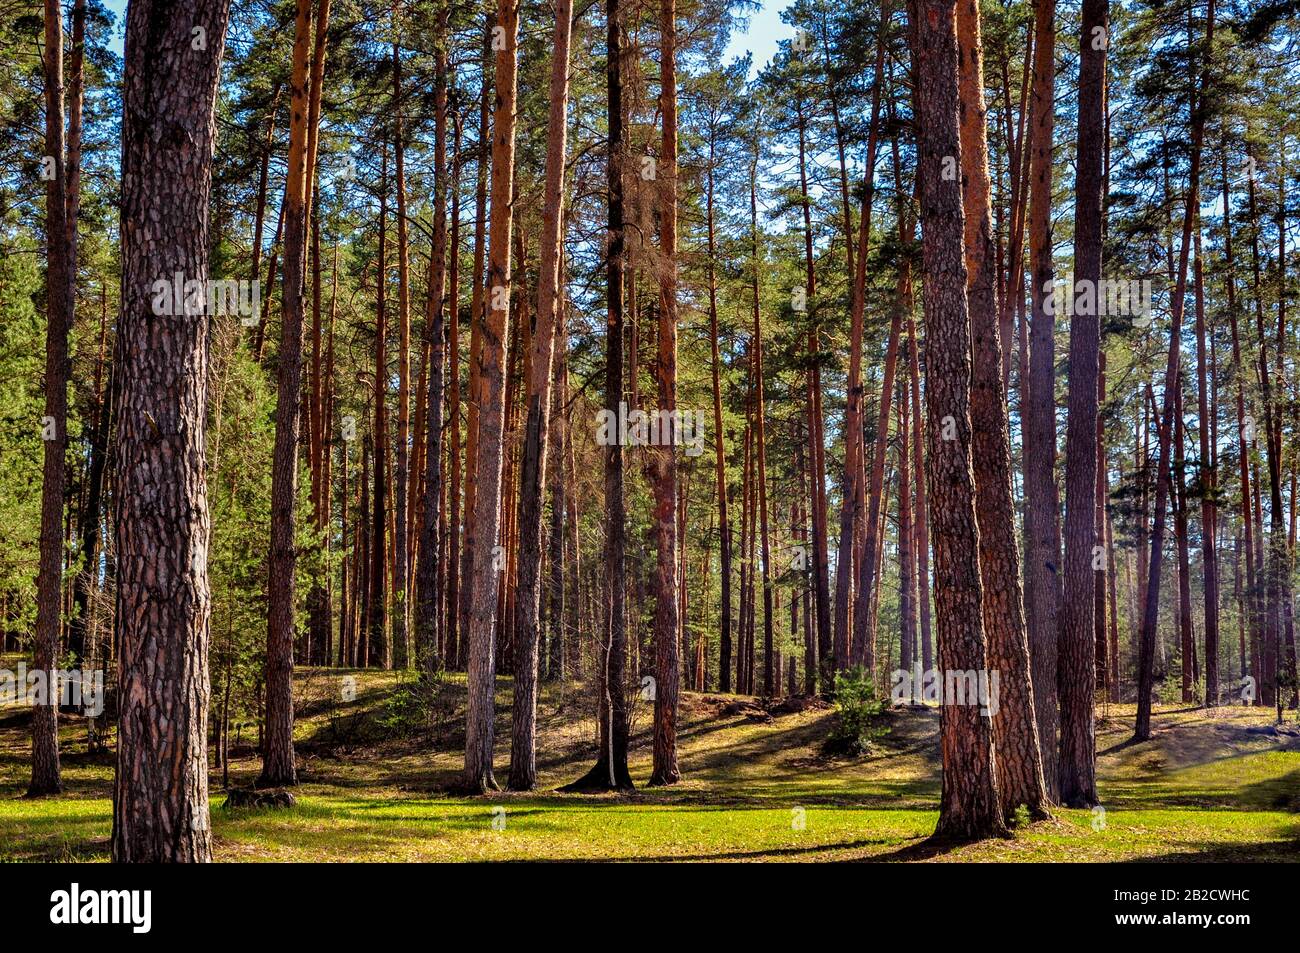 A clearing on the edge of a pine forest, beautifully lit by the side rays of the sun on a clear summer day. Pine trees cast long shadows. Stock Photo